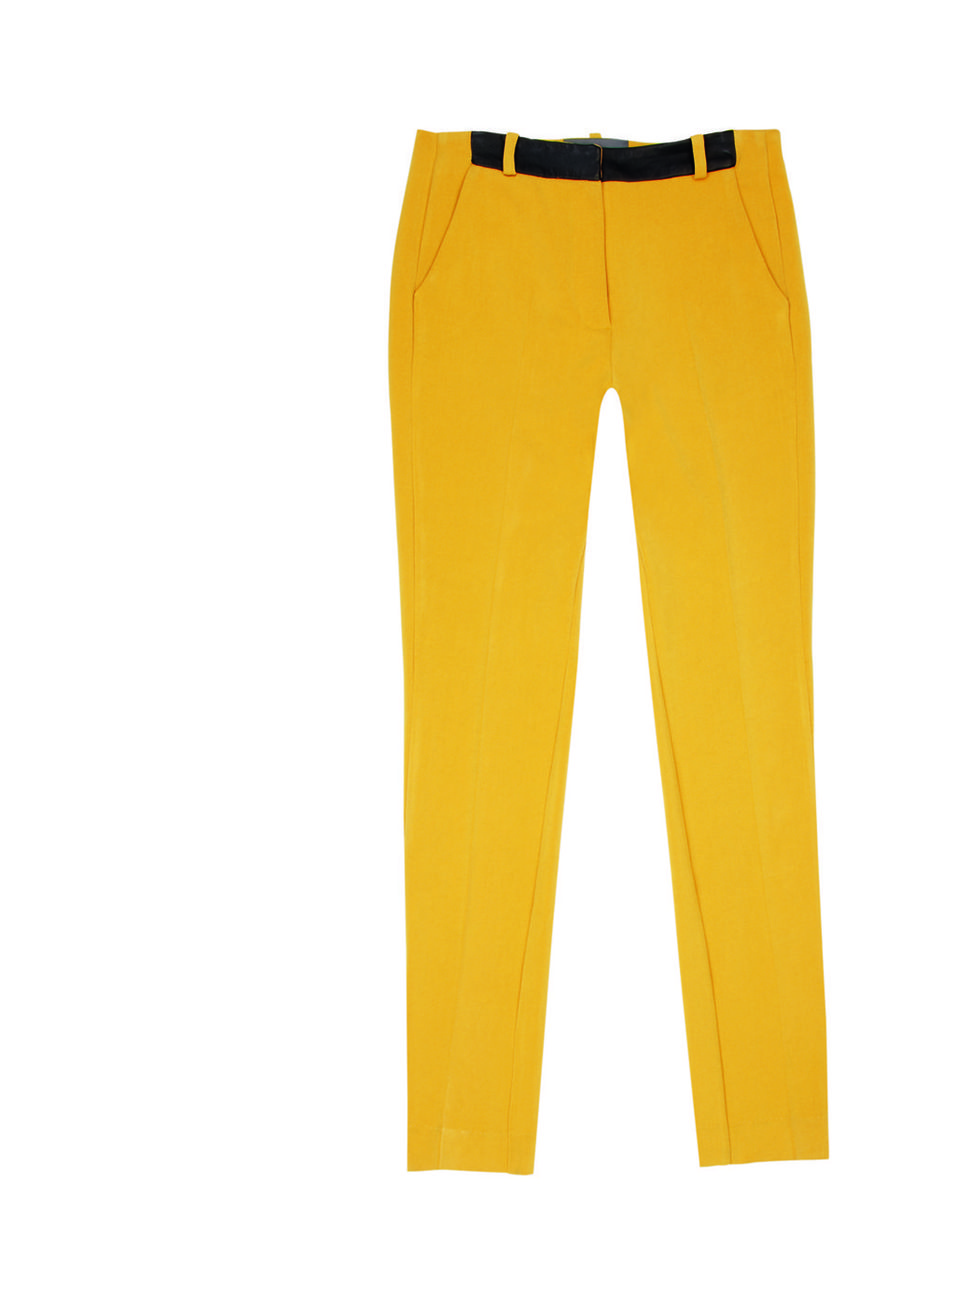 <p>Antipodium Trousers £190 at www.antpodium.com</p><p><a href="http://www.antipodium.com/bottoms/3-colts-trouser-in-tango">BUY NOW</a> </p>